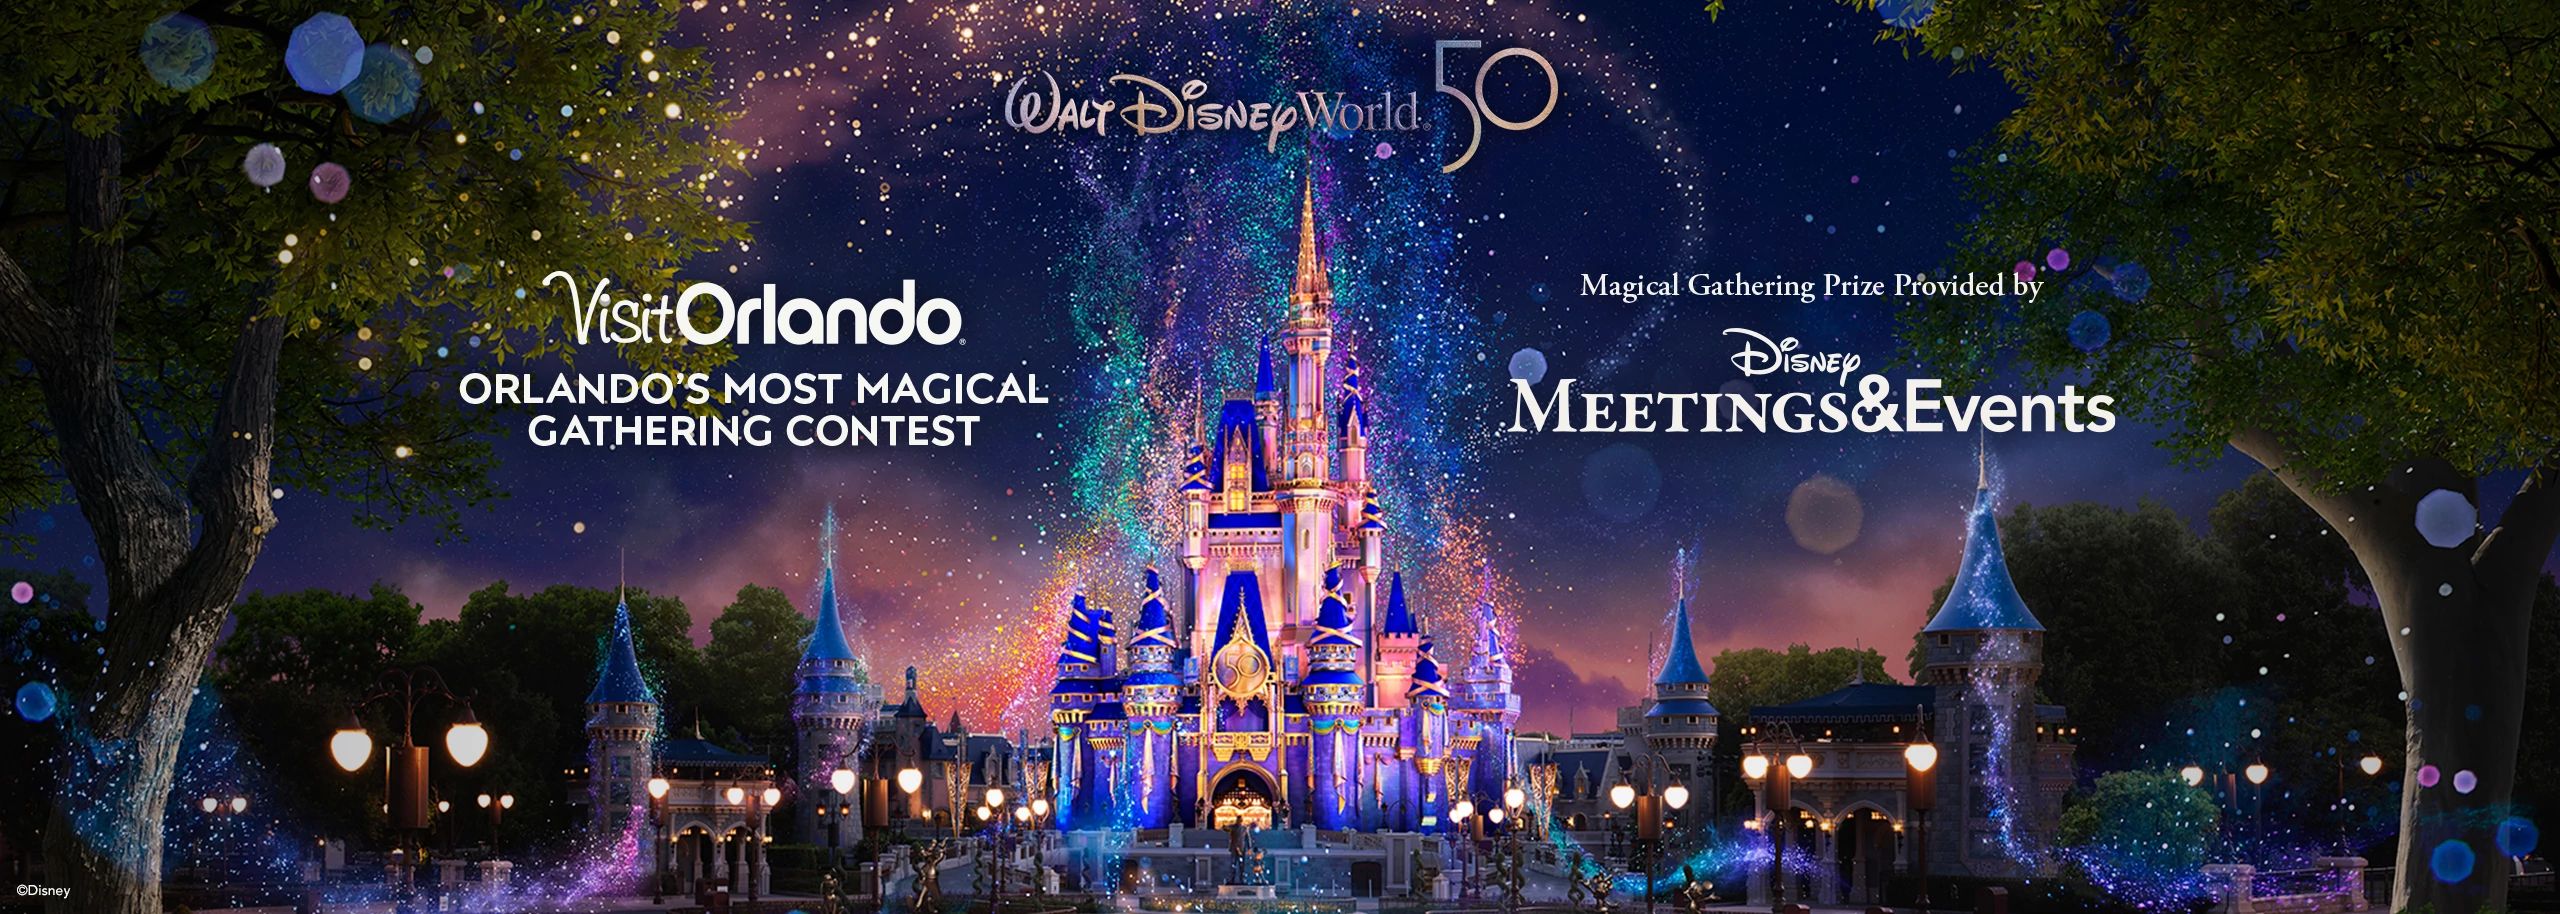 Visit Orlando's Most Magical Gathering Contest is the most successful yet. 